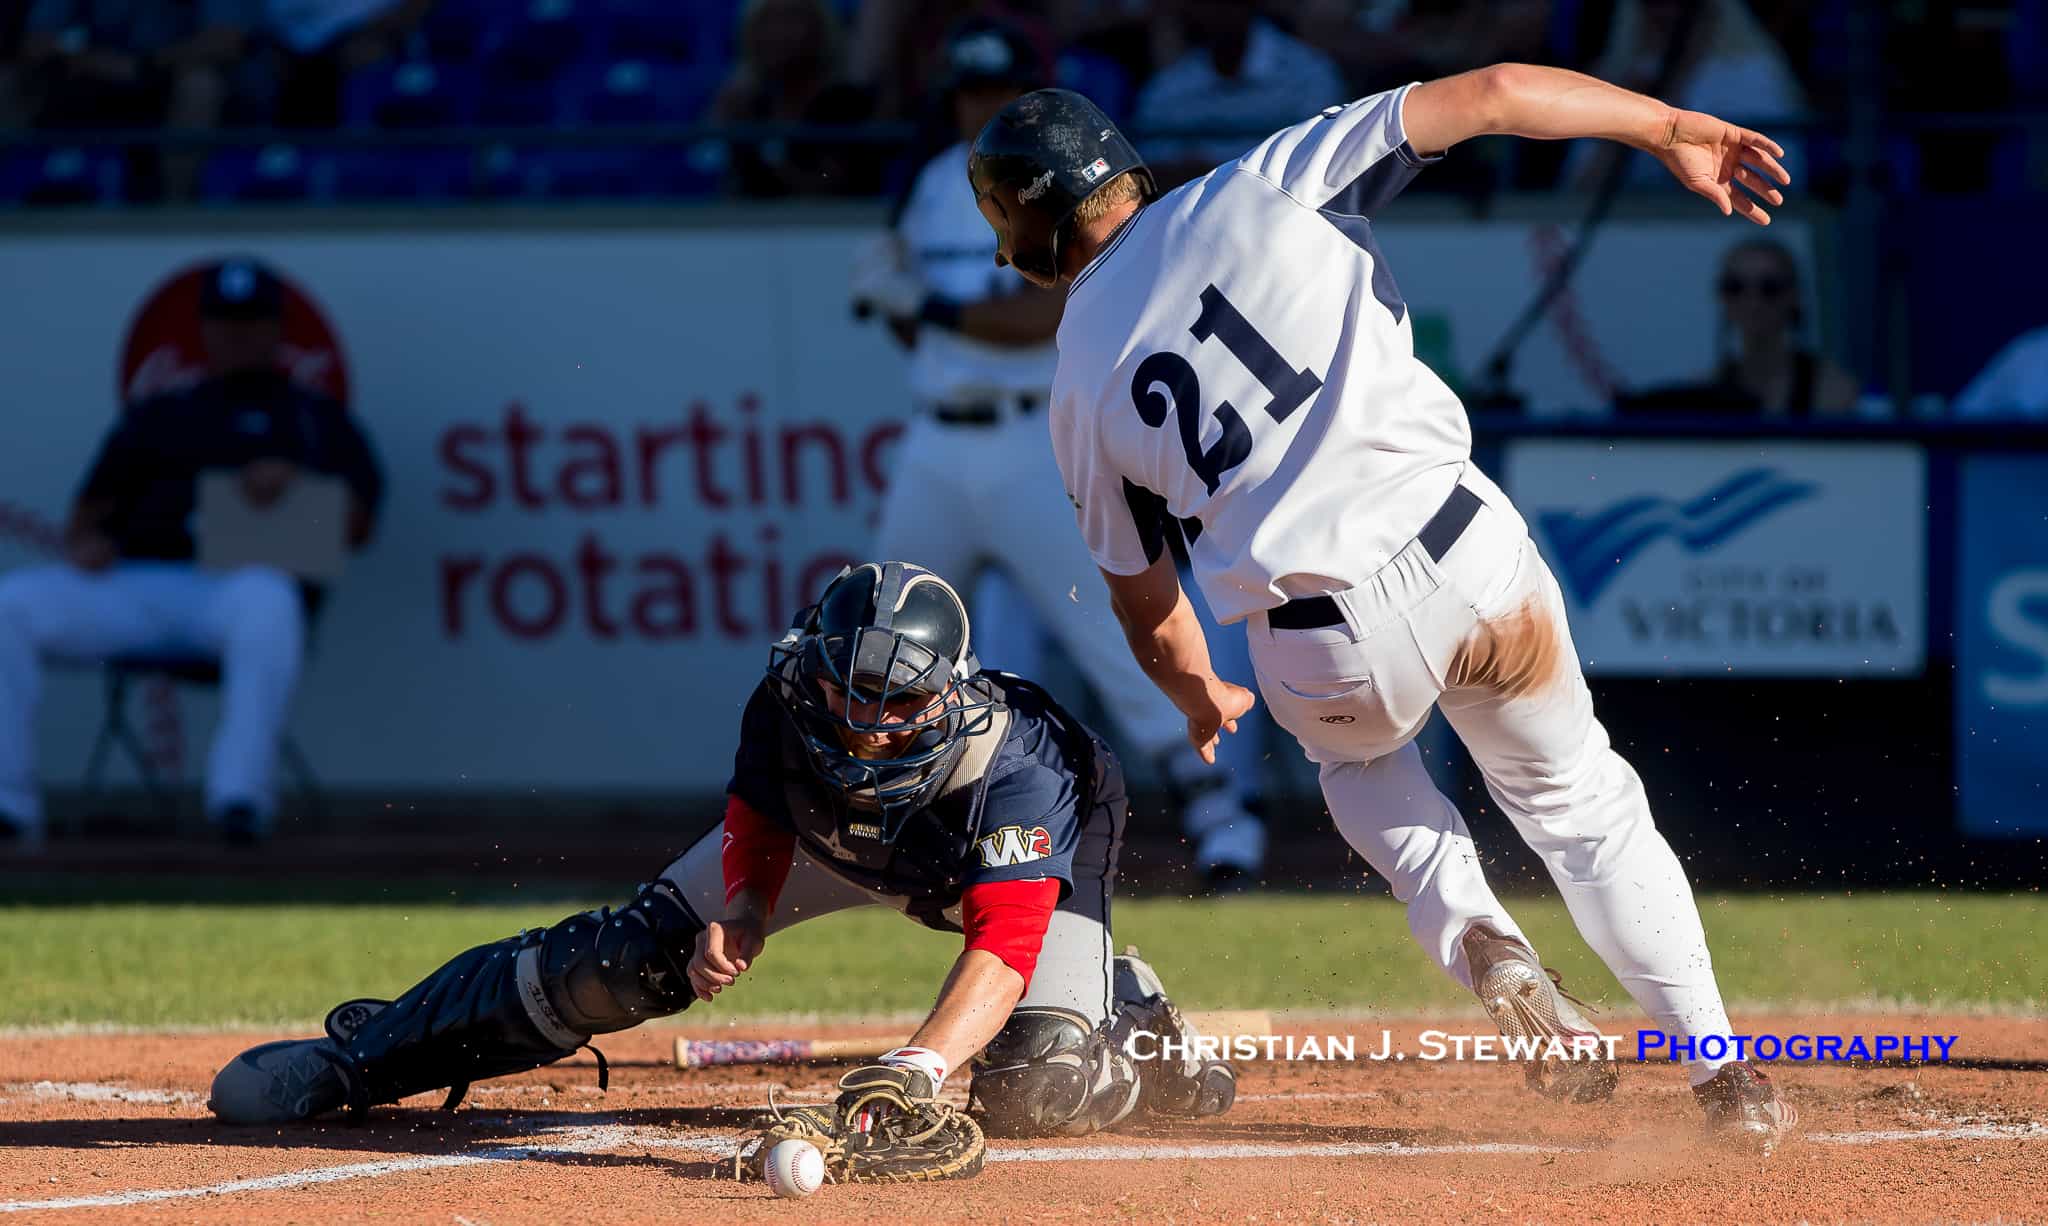 HarbourCats Use Long Ball to Thump Sweets